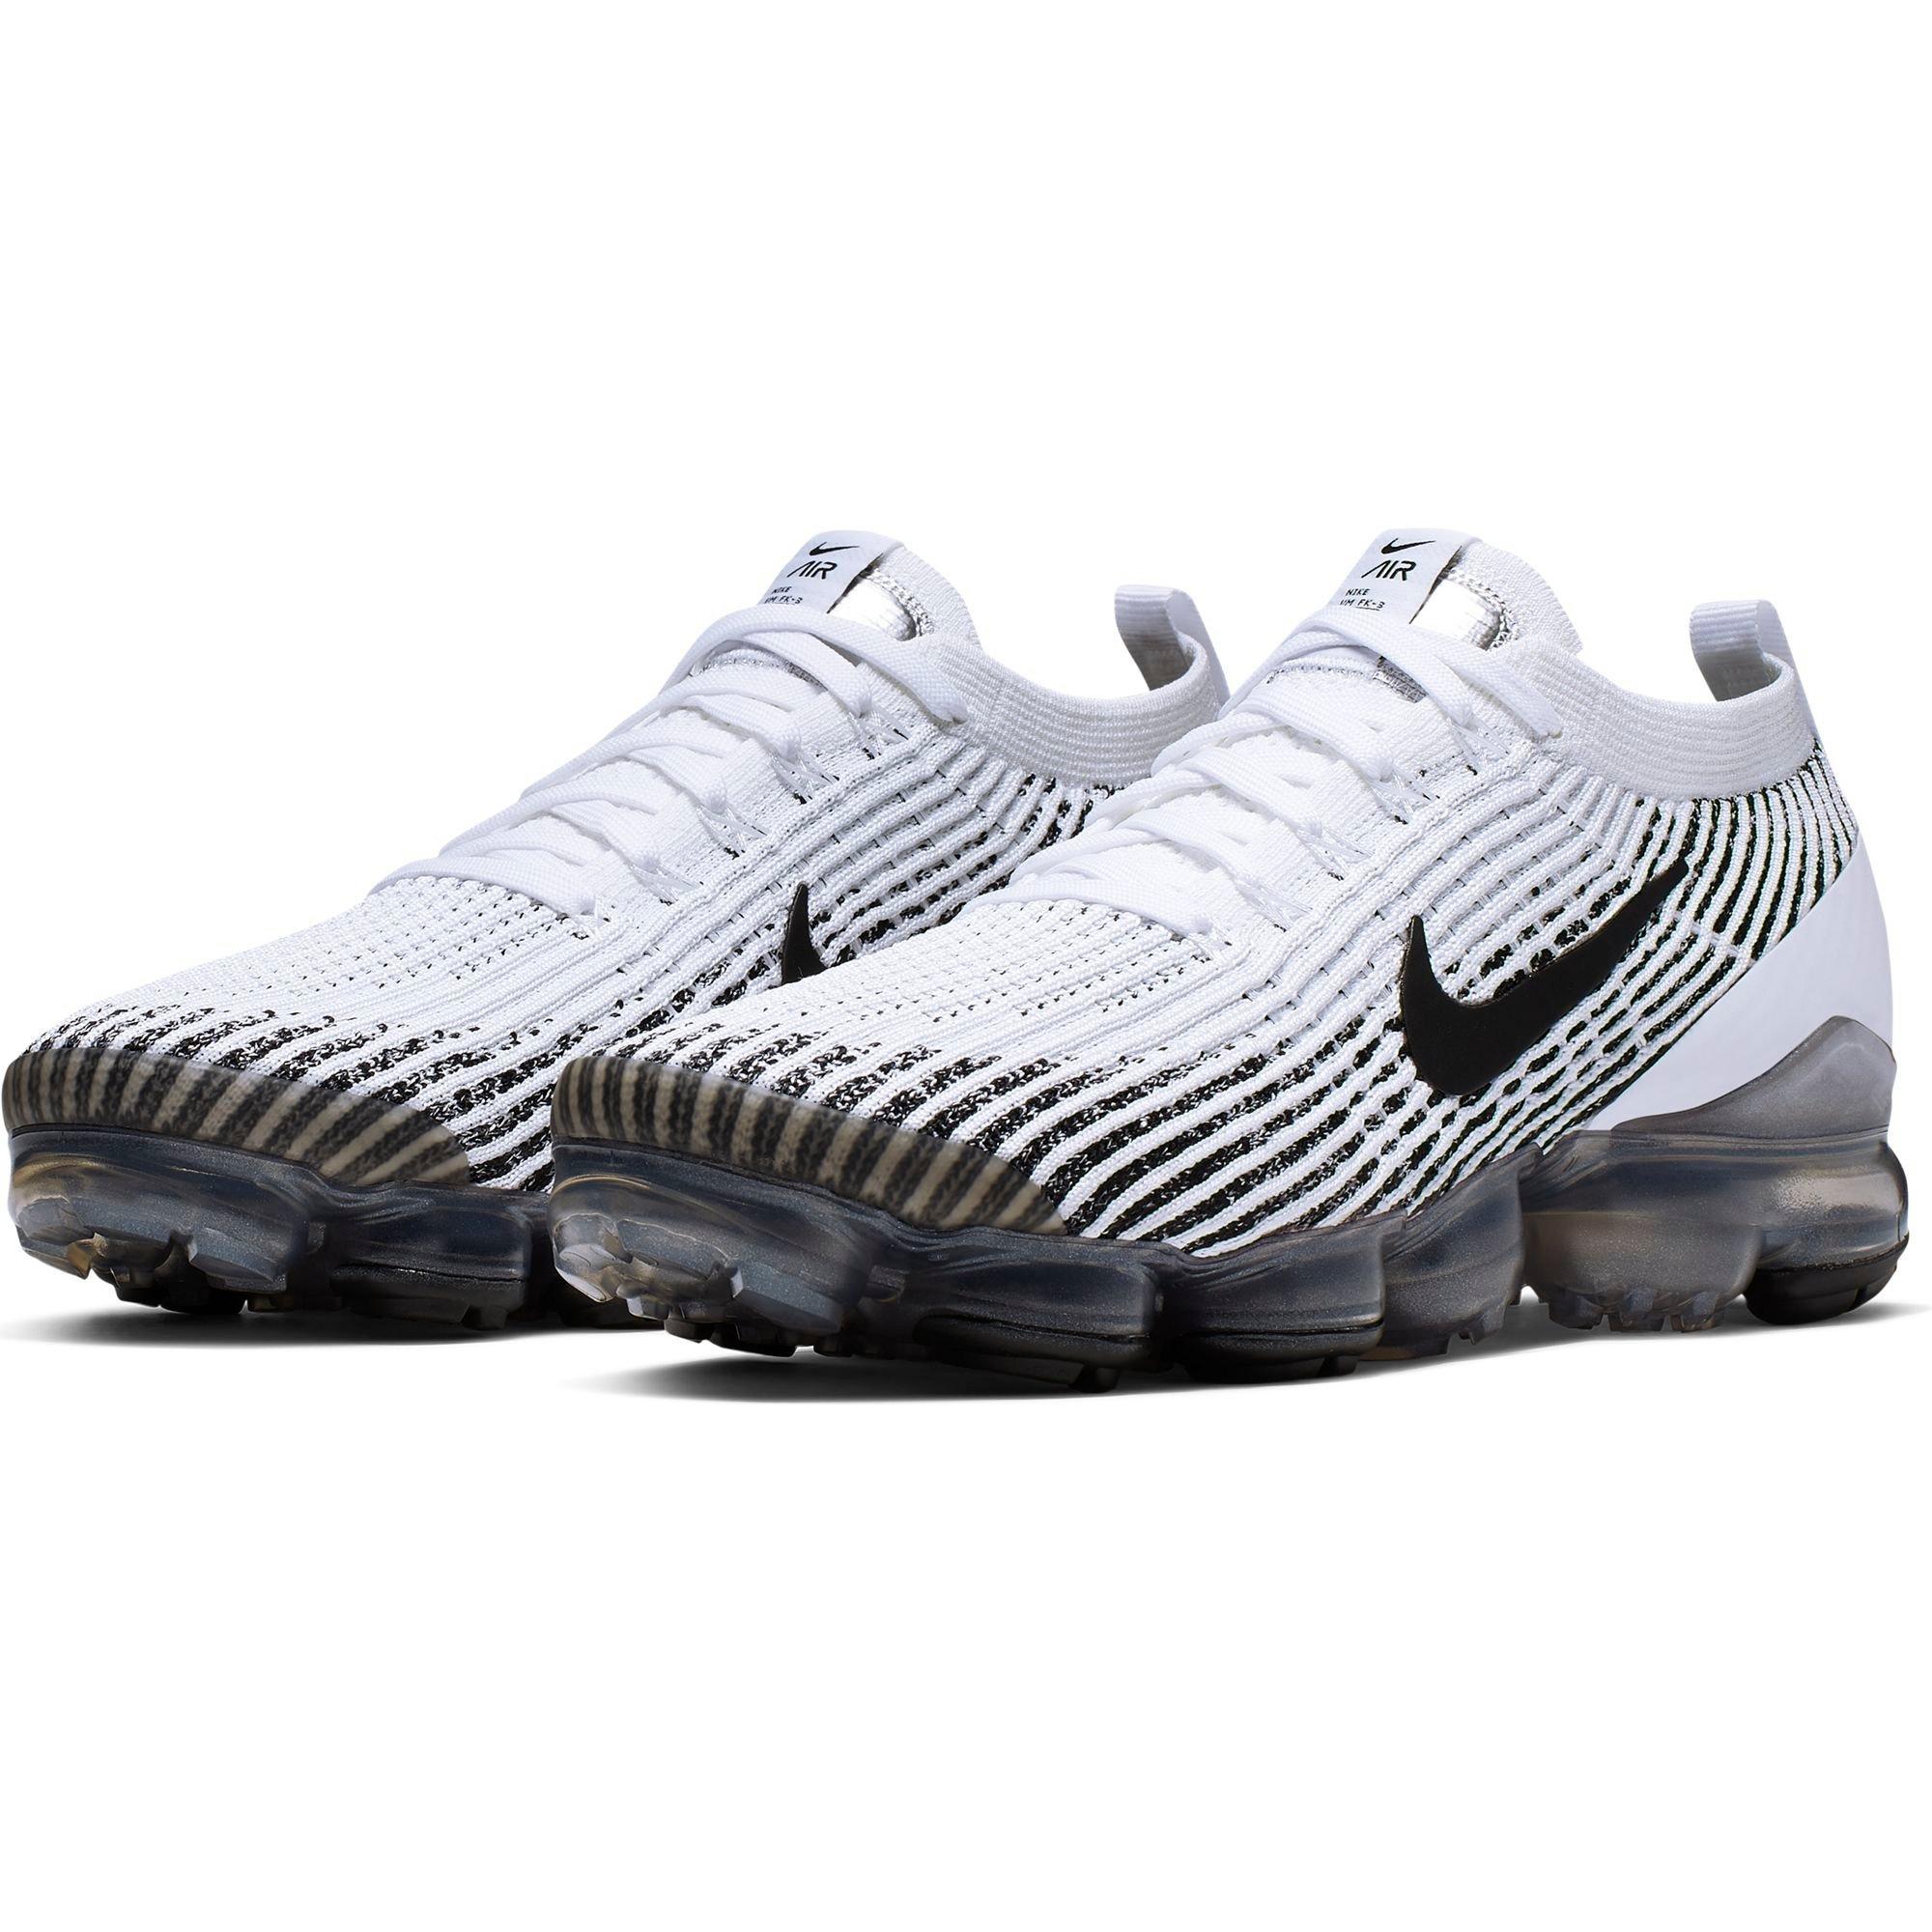 white and black vapormax flyknit 3